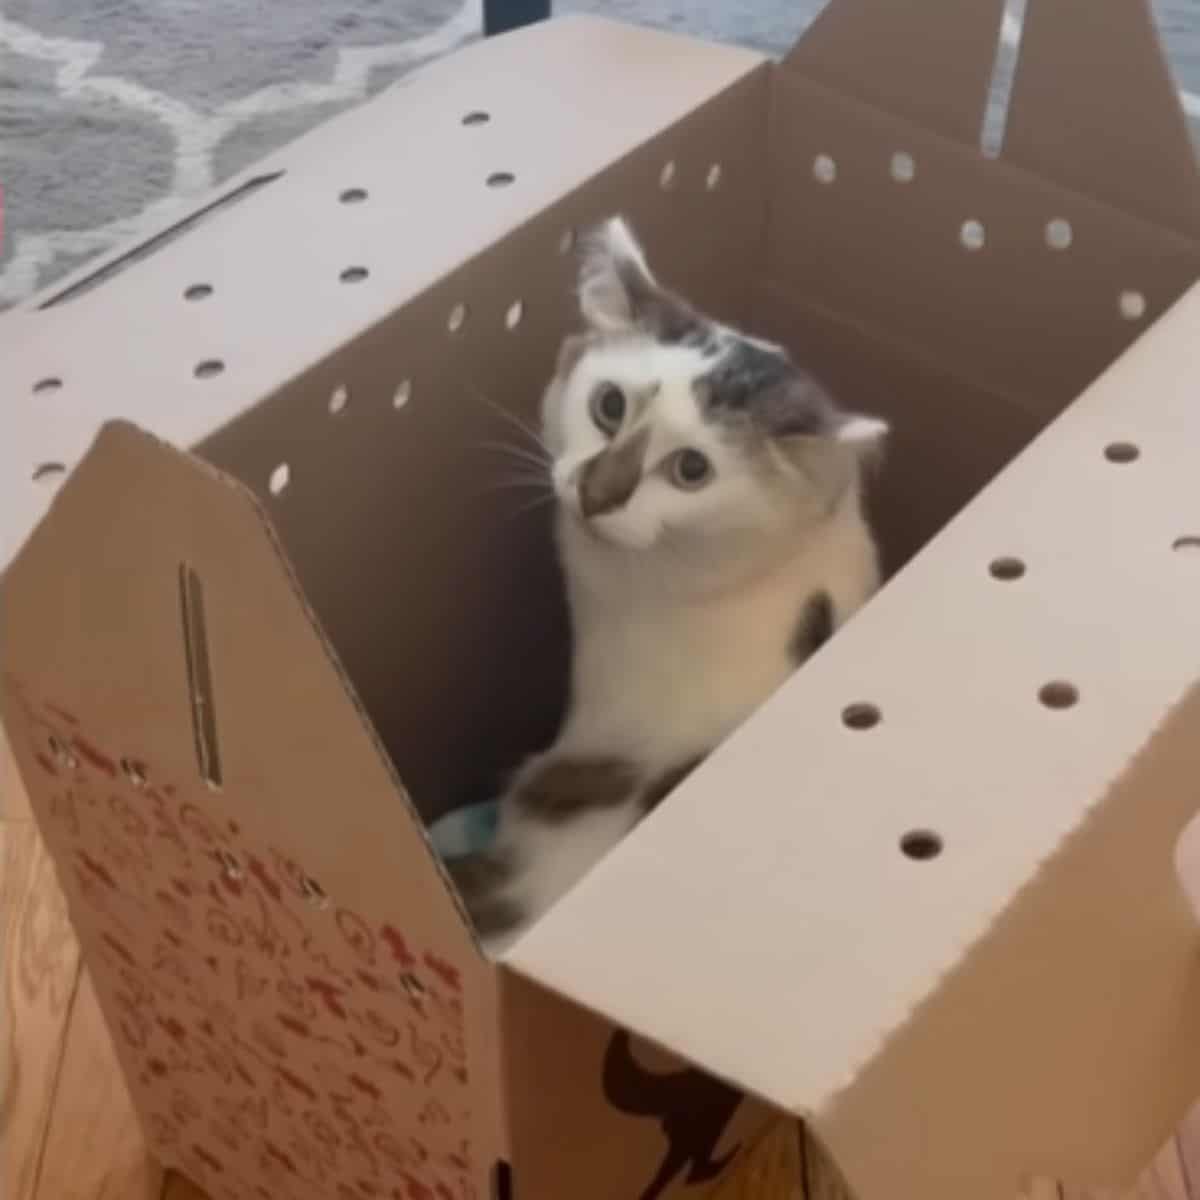 the shy cat in the box is hiding